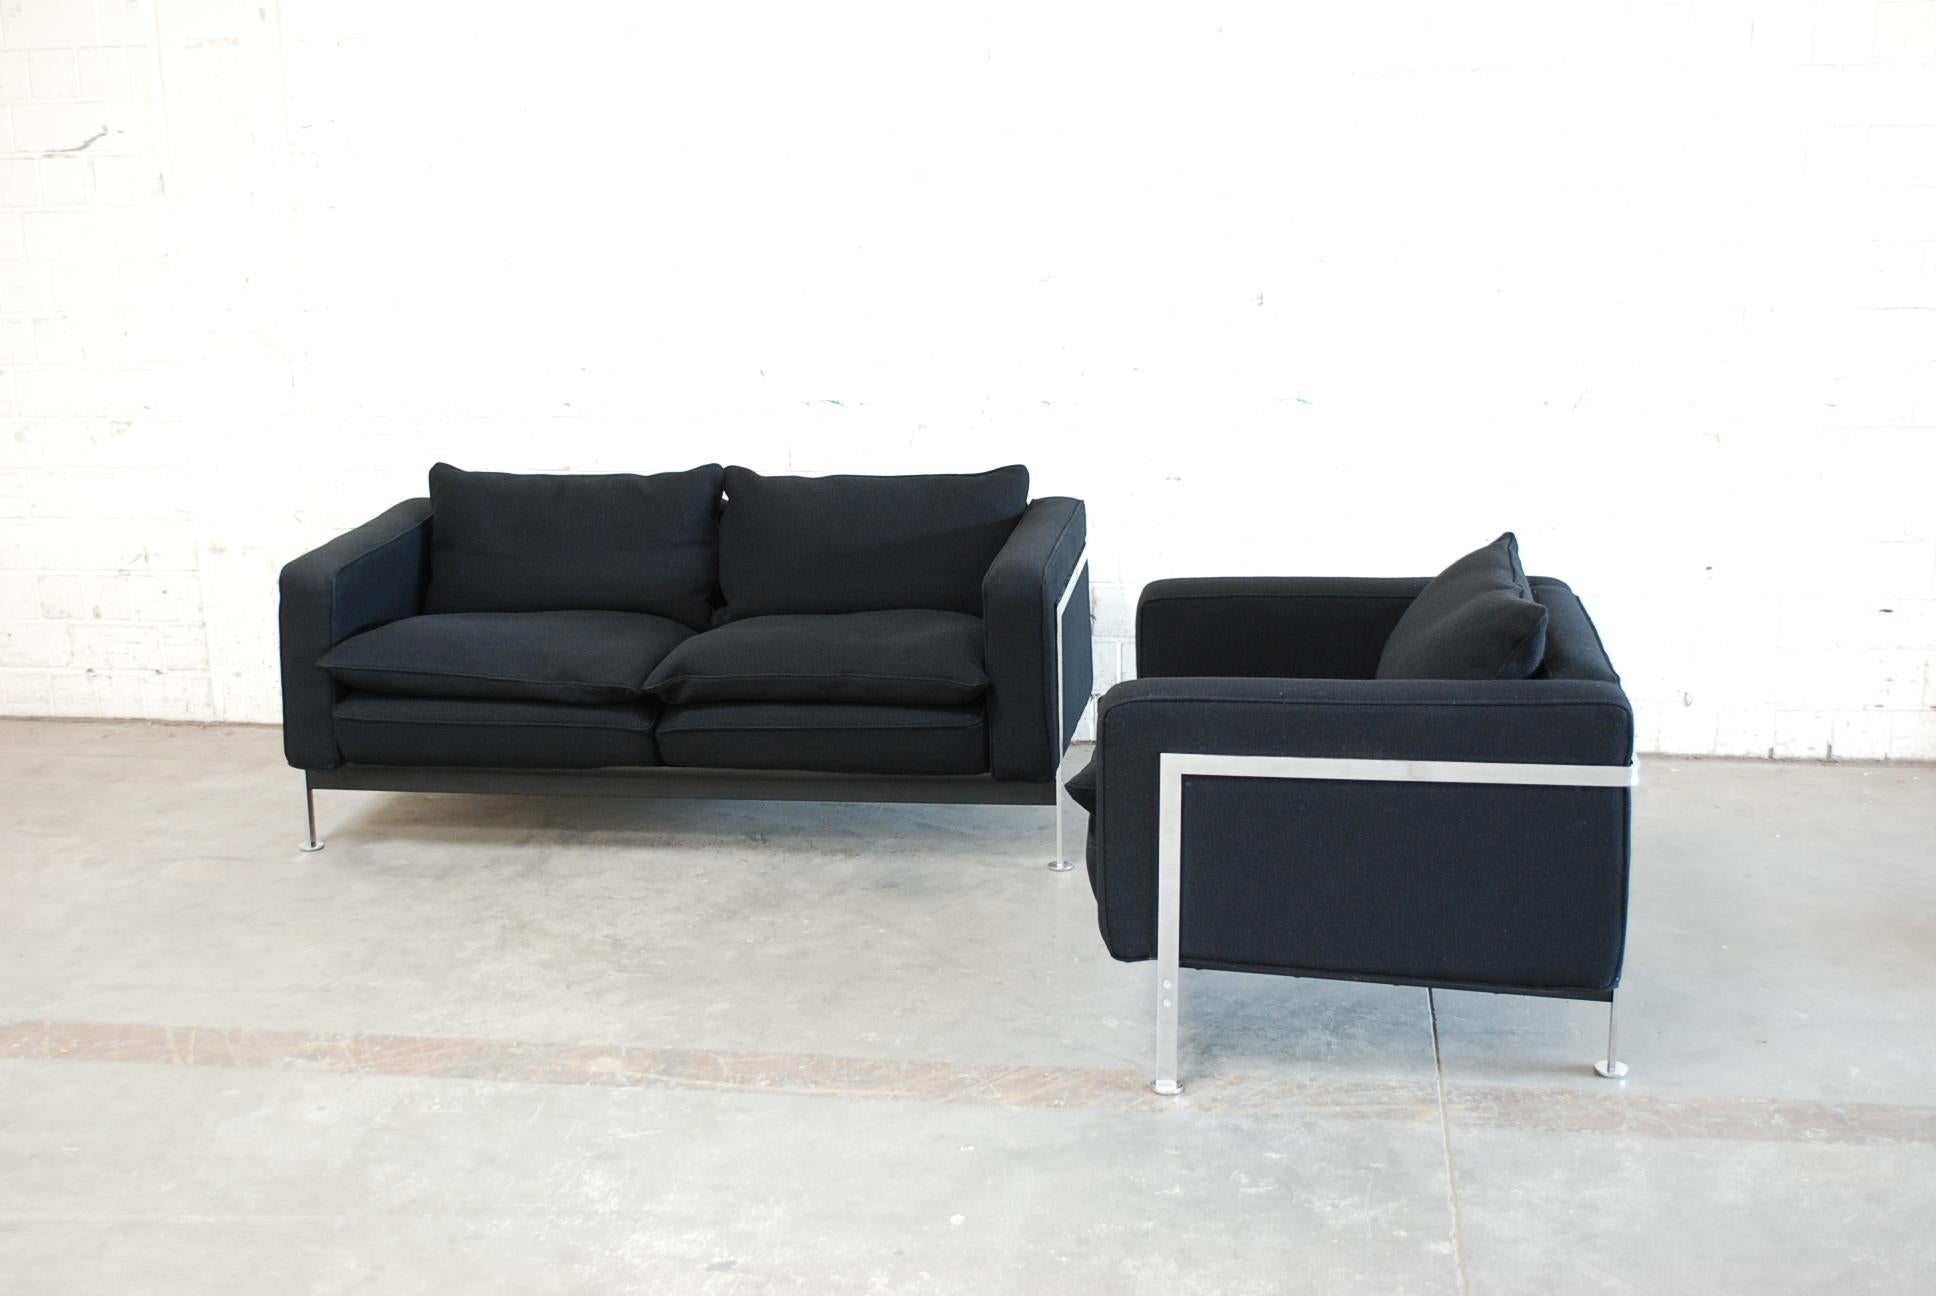 Robert Haussmann RH 302 2-seat sofa and armchair manufactured by De Sede.
The sofa and chair were reupholstered some years ago in black Kvadrat Halingdal fabric.
Chrome steel frame.
A soft comfortable seating set

Dimensions: Sofa

Width 155